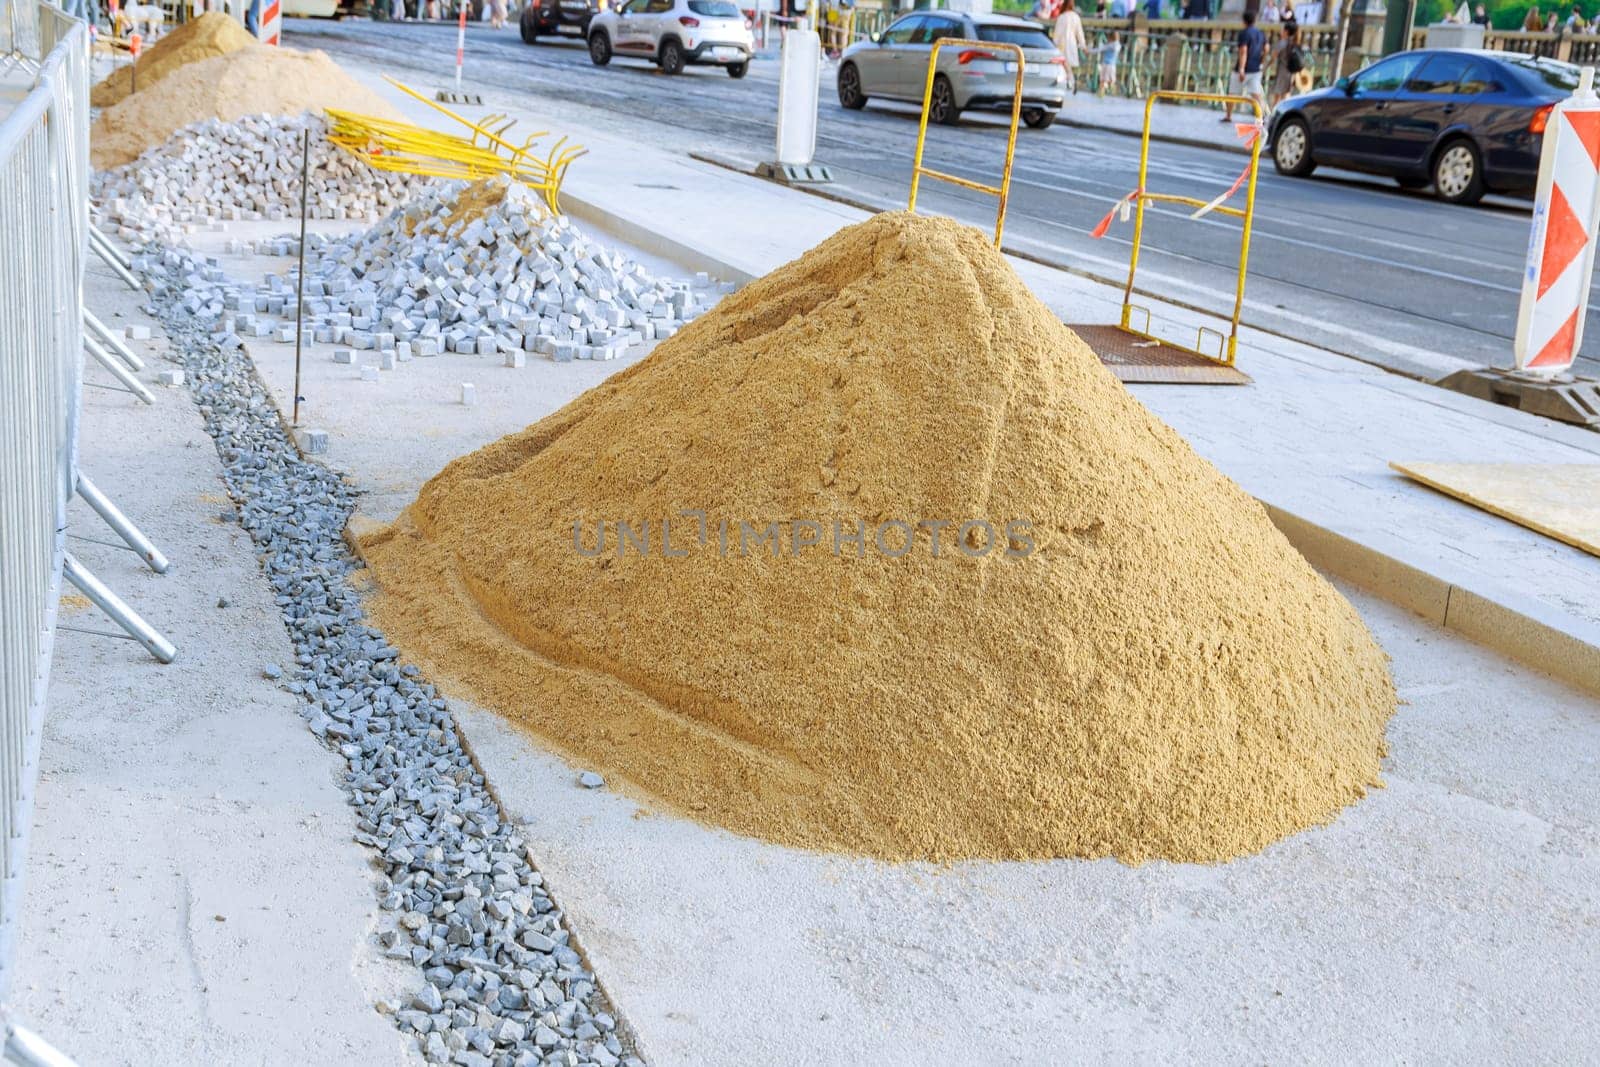 A pile of sand lying on a new pavement for paving and jointing. Laying paving stones of white and gray color, small size in the city. Arrangement of city infrastructure.